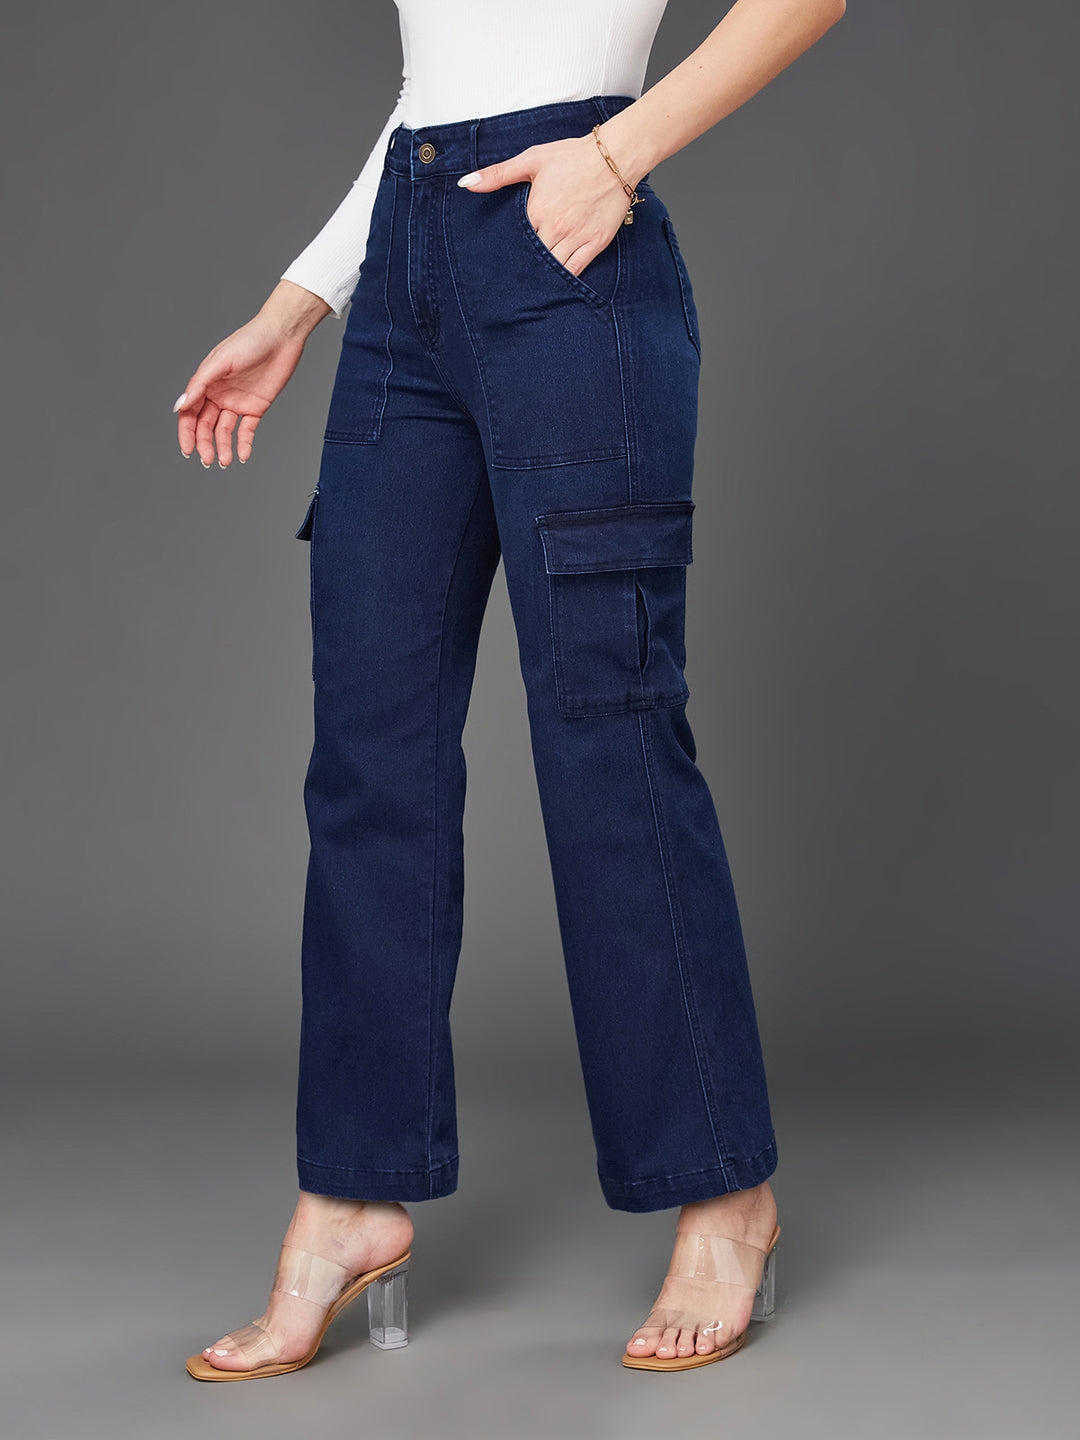 MISS CHASE | Women's Blue Solid Cargos